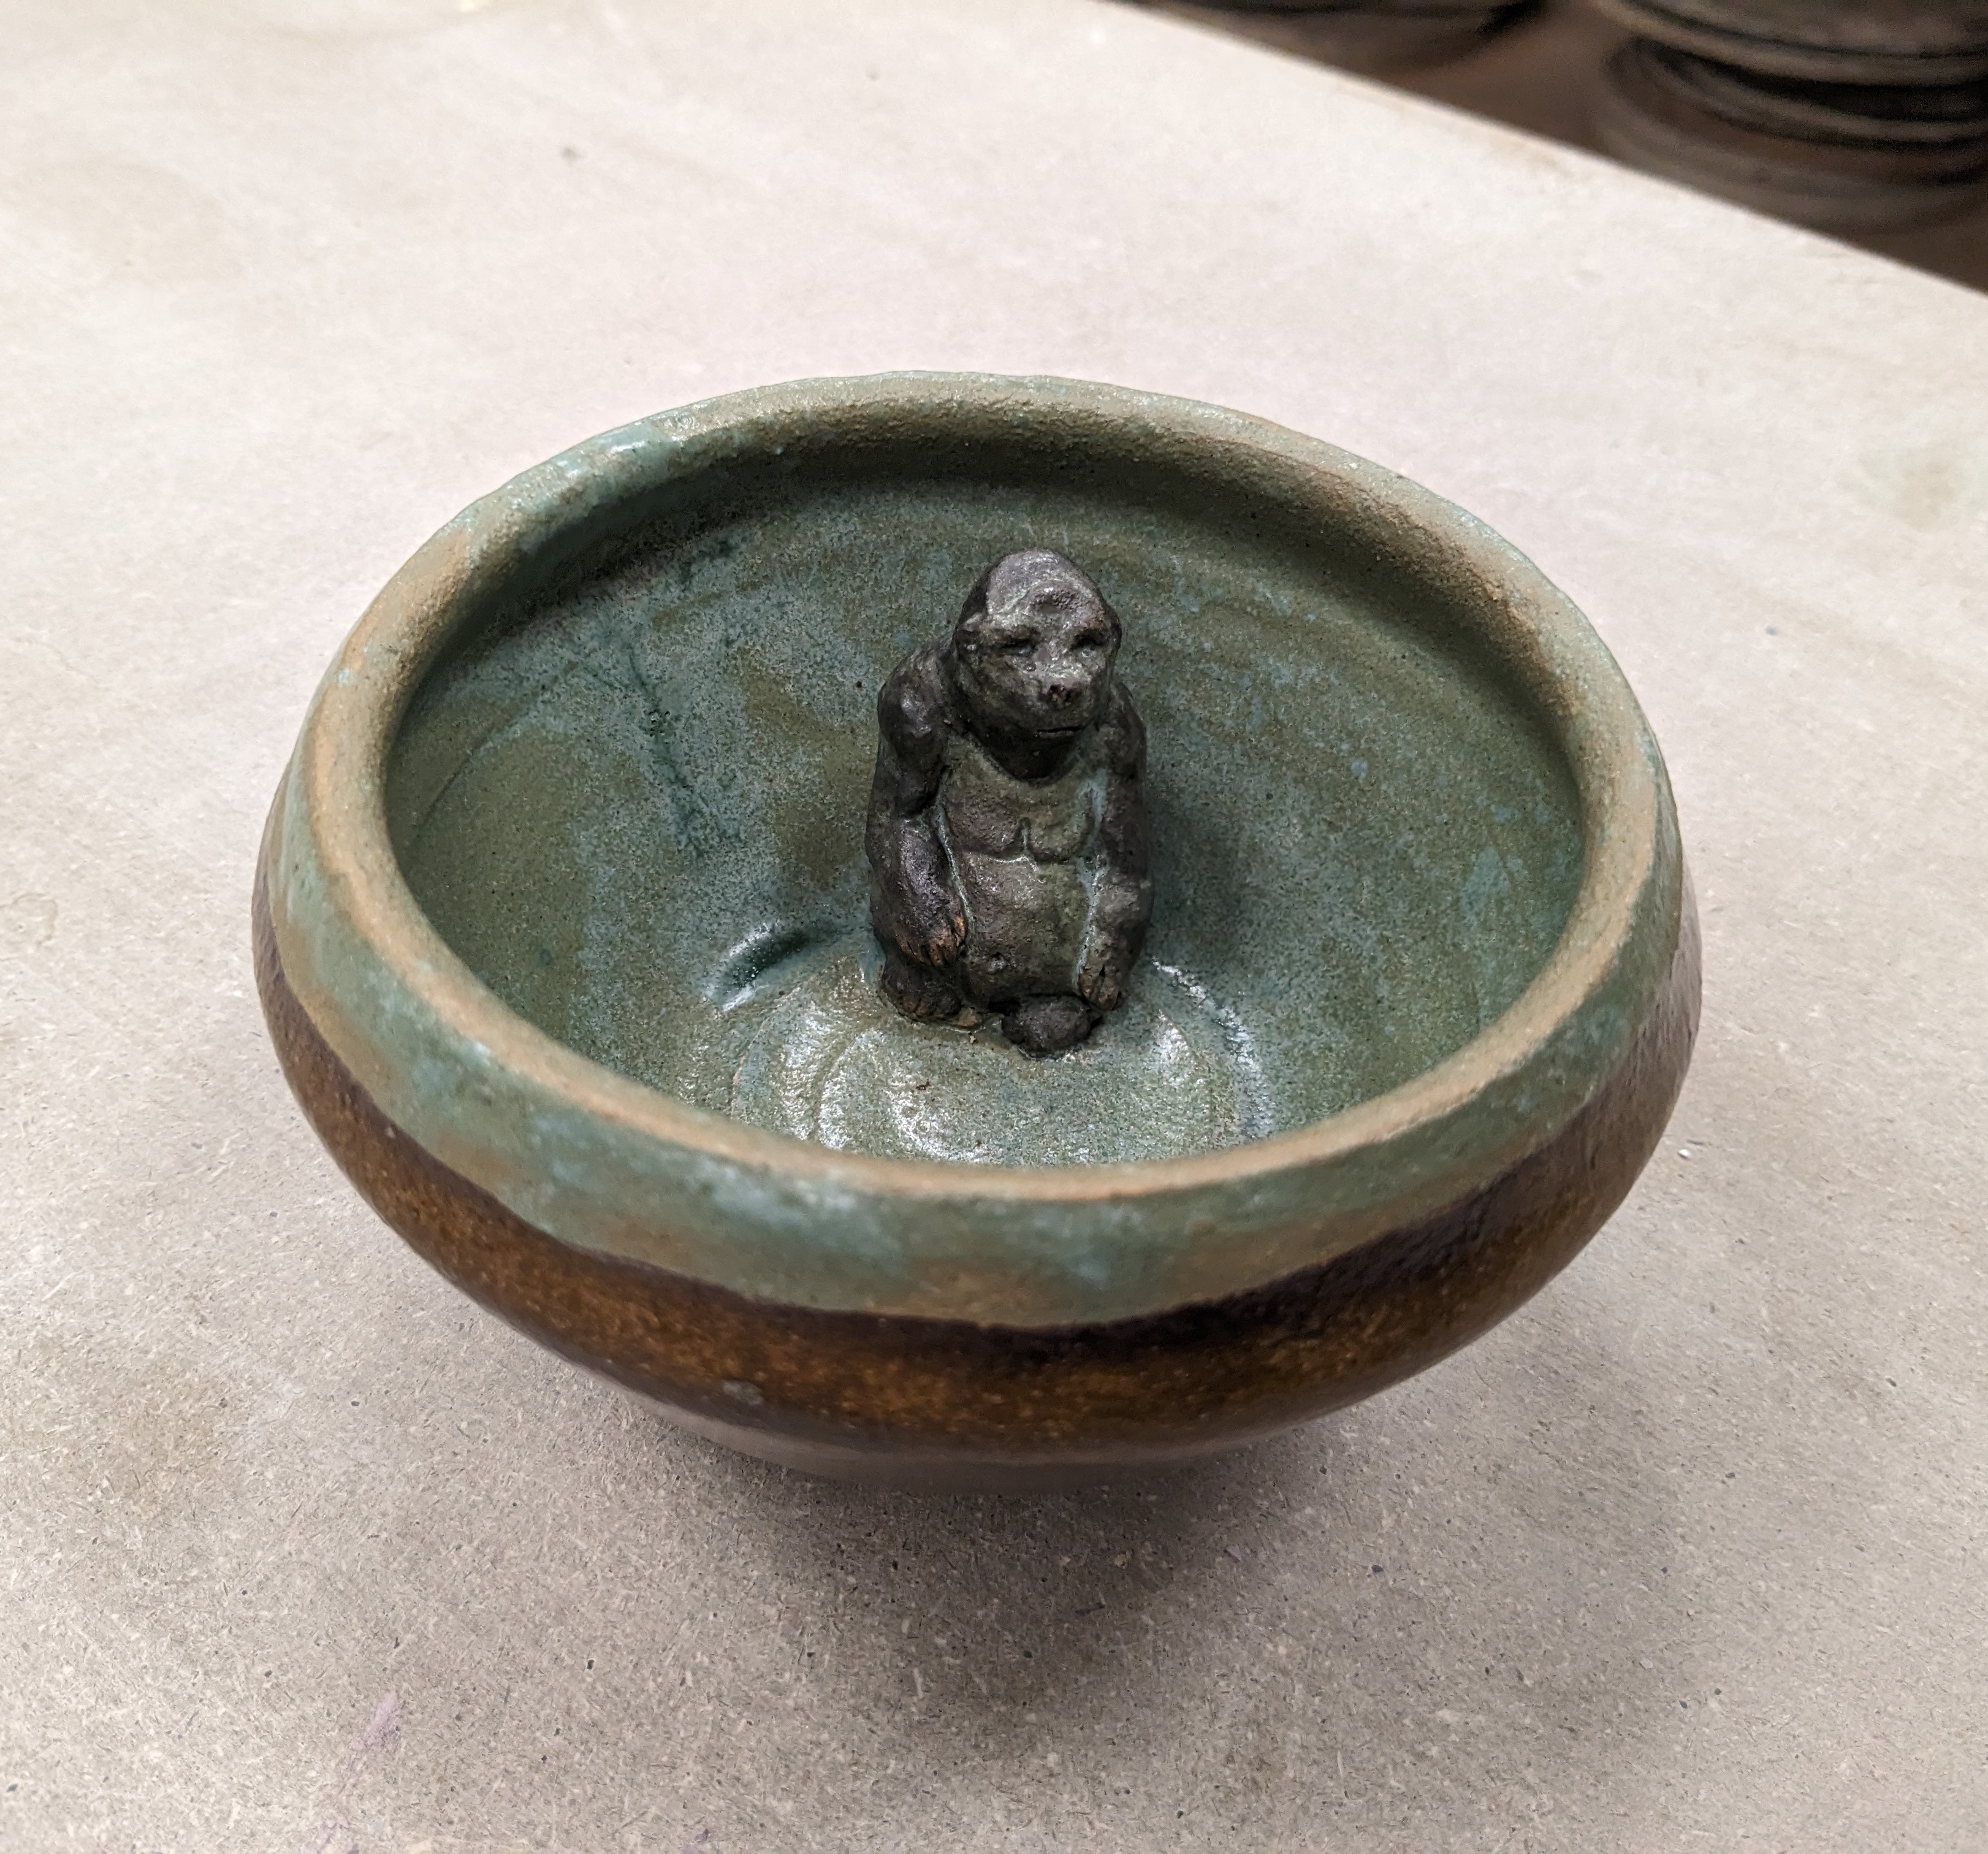 Ceramic bowl, brown on the outside and green on the inside, with a dark green ceramic gorilla sitting pensively inside the bowl